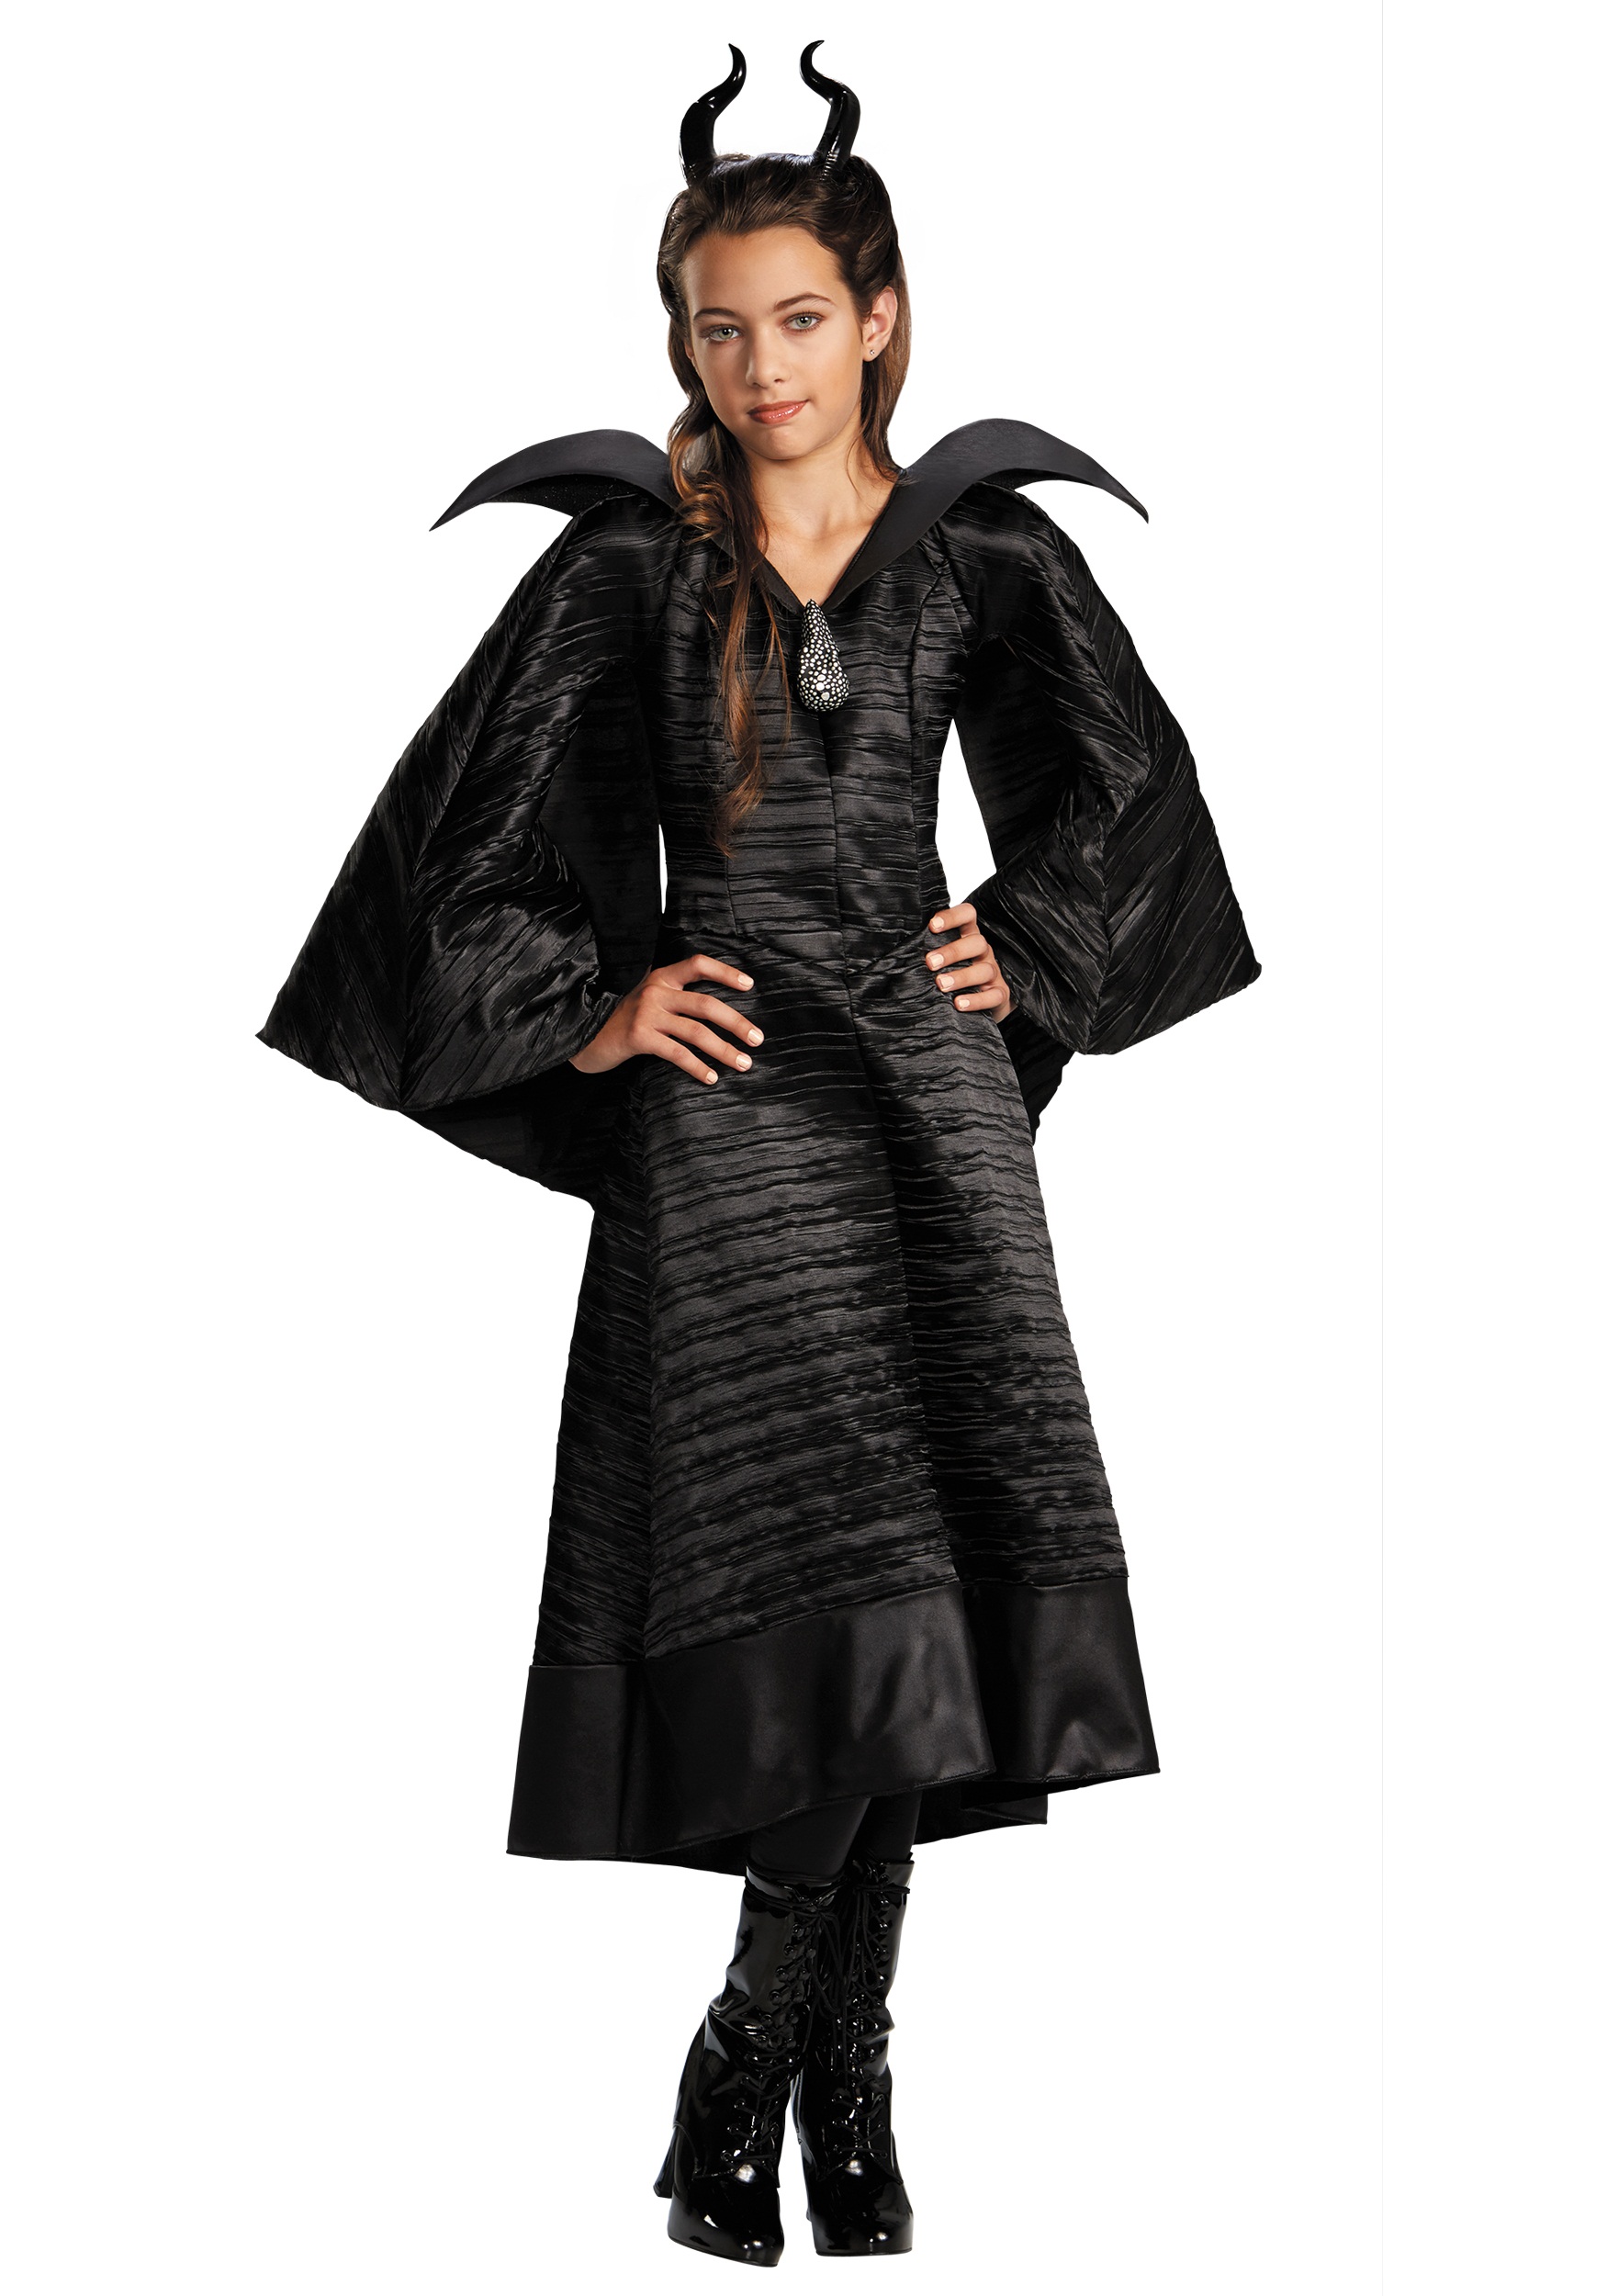 Photos - Fancy Dress Deluxe Disguise  Black Maleficent Christening Gown Costume for Girls Black 